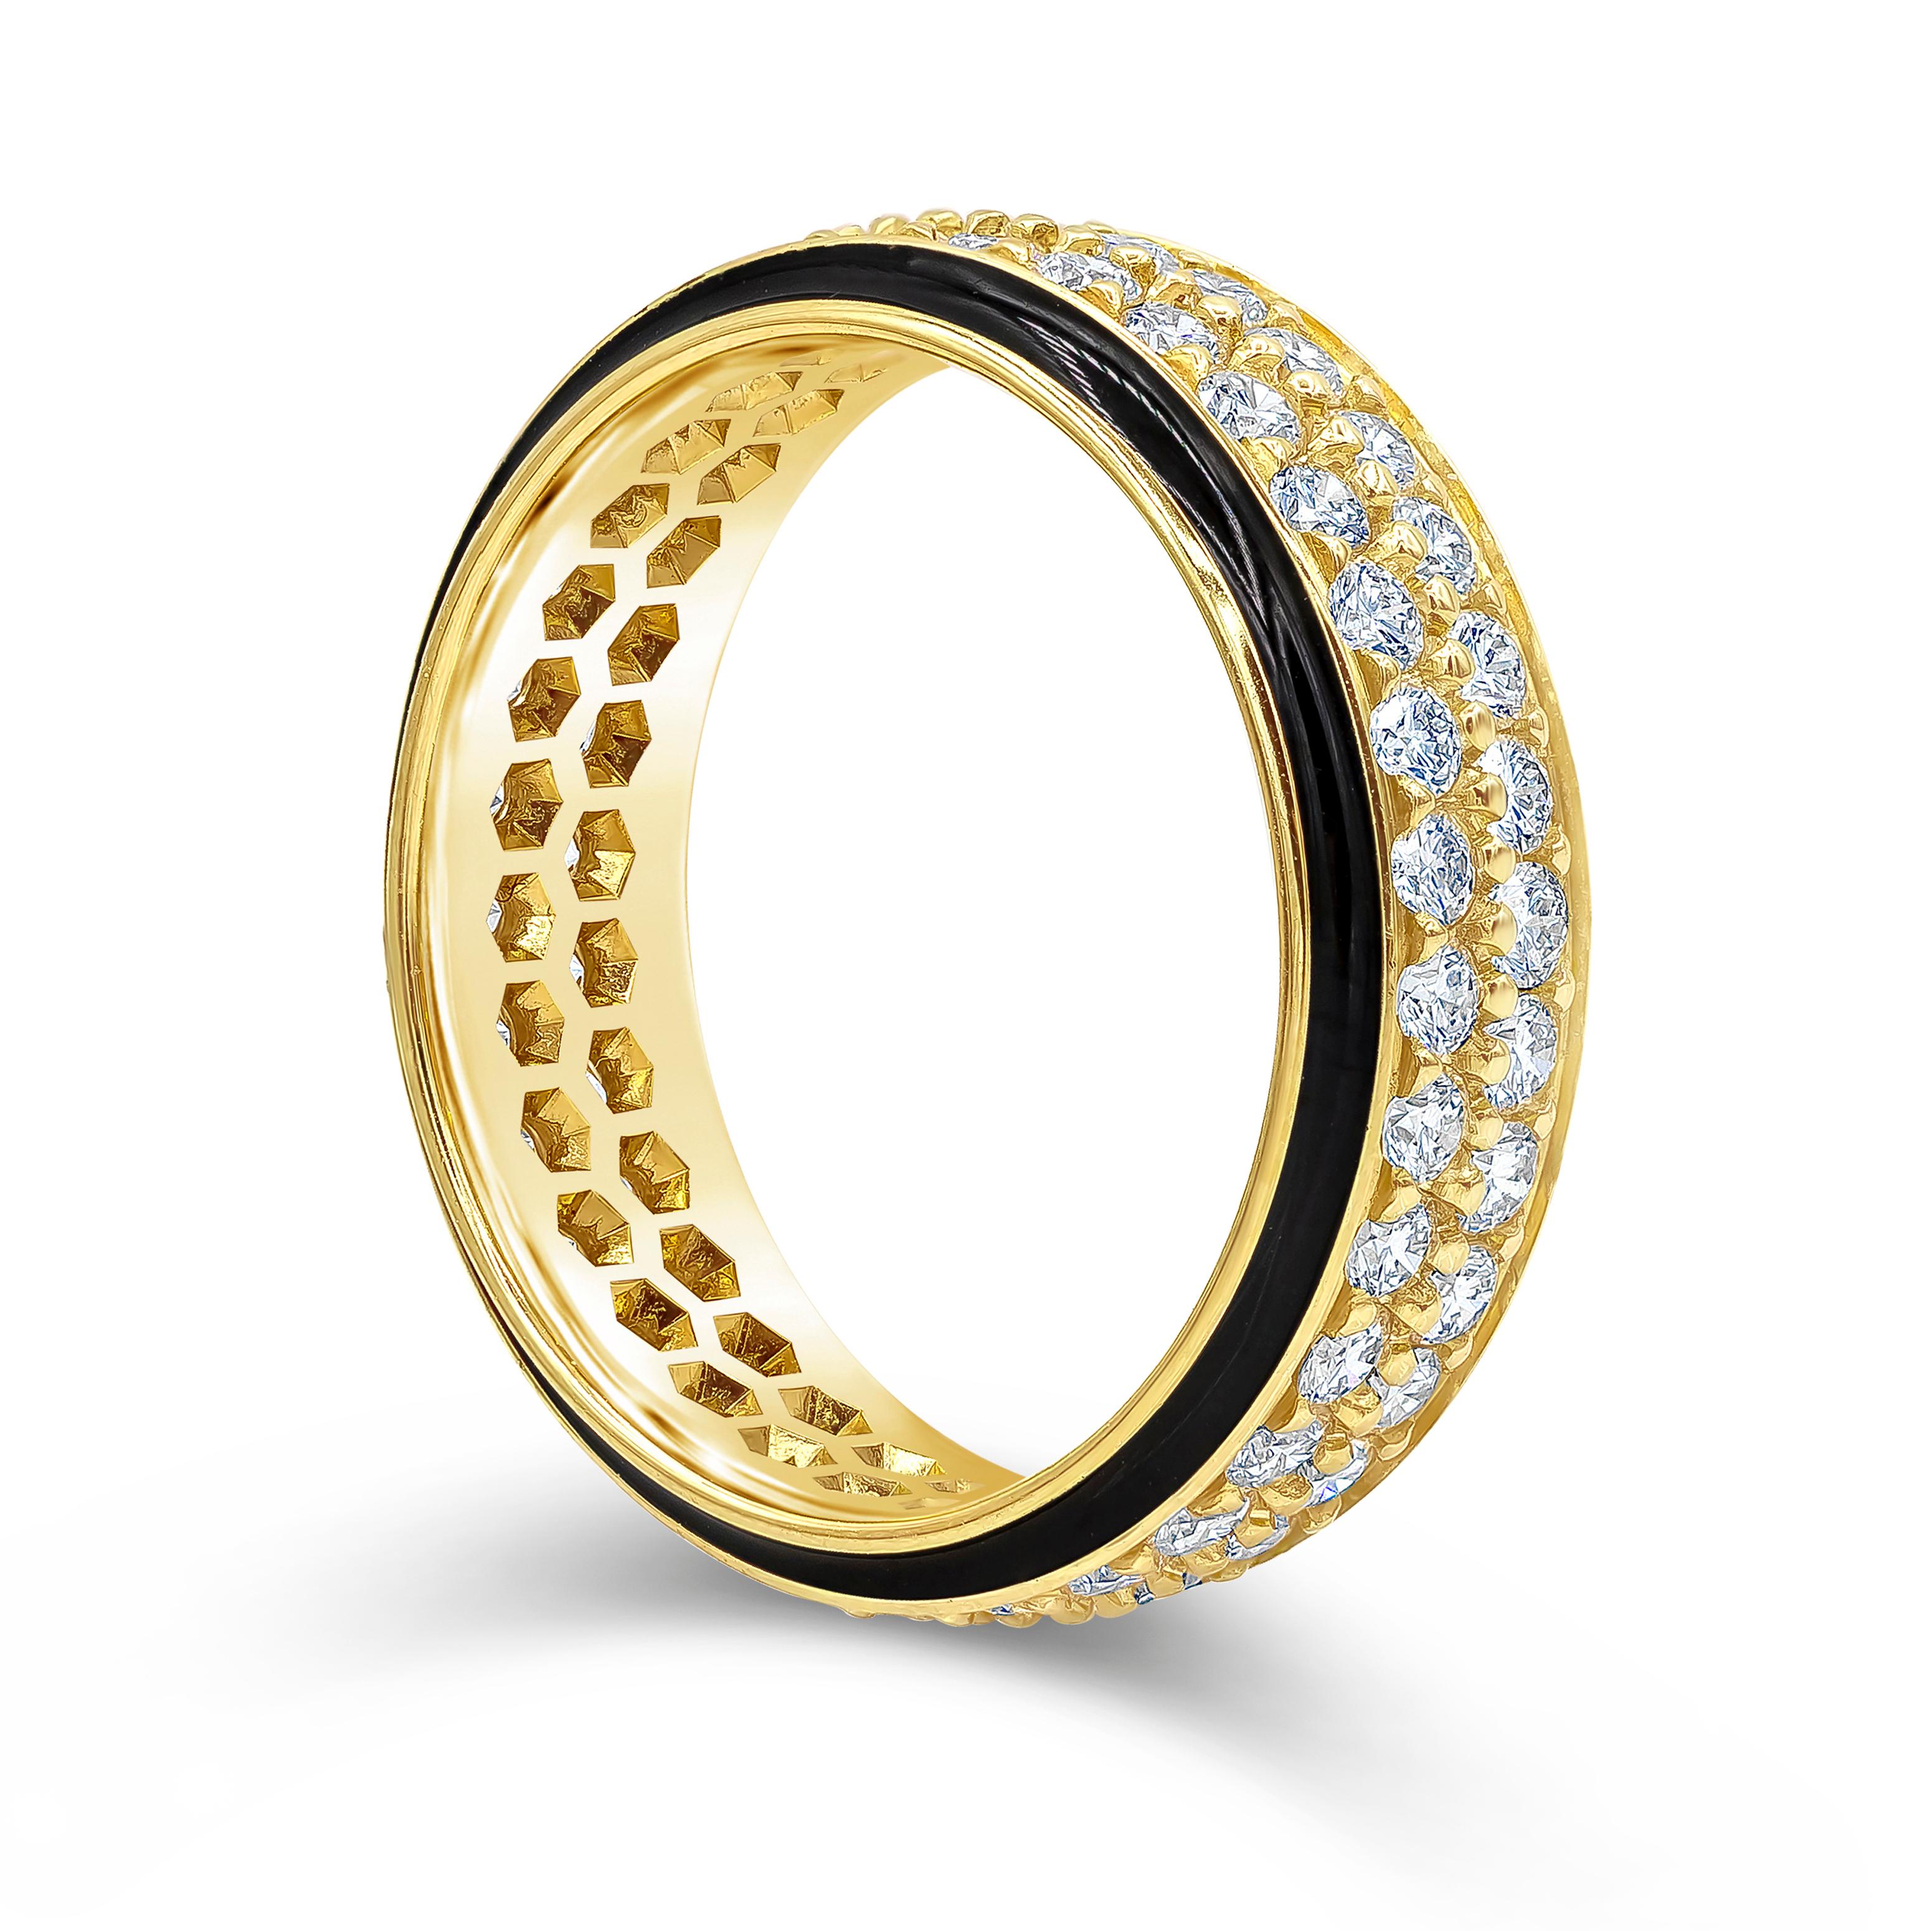 A fashionable and unique ring showcasing two rows of round brilliant diamonds, accented with two rows of black enamel. Diamonds weigh 1.53 carats total, G Color and VS in Clarity. Made with 18K Yellow Gold, Size 6.75 US.

Style available in